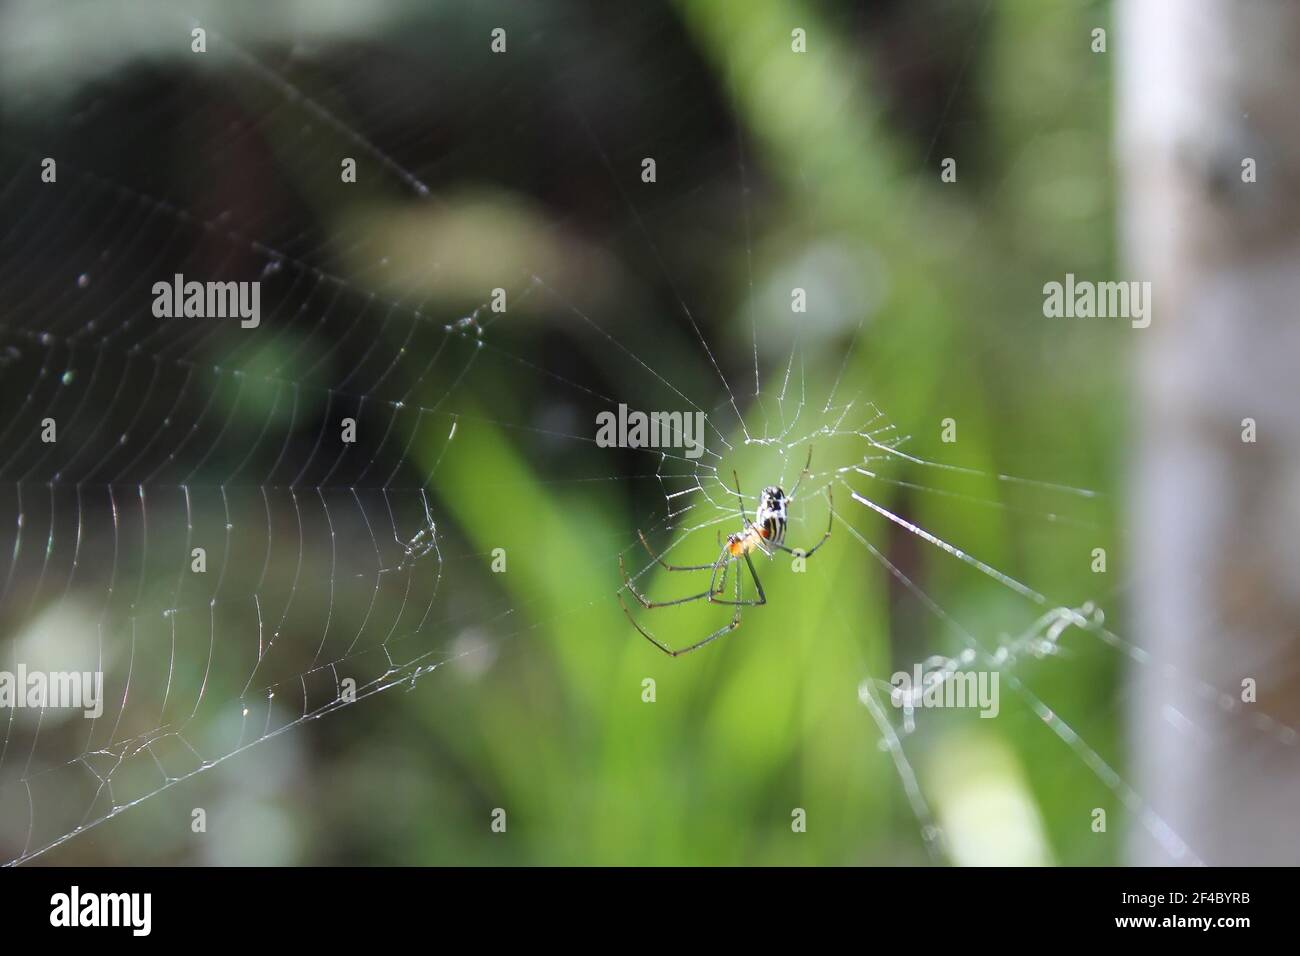 Orb weaver spider catches bugs in its web Stock Photo